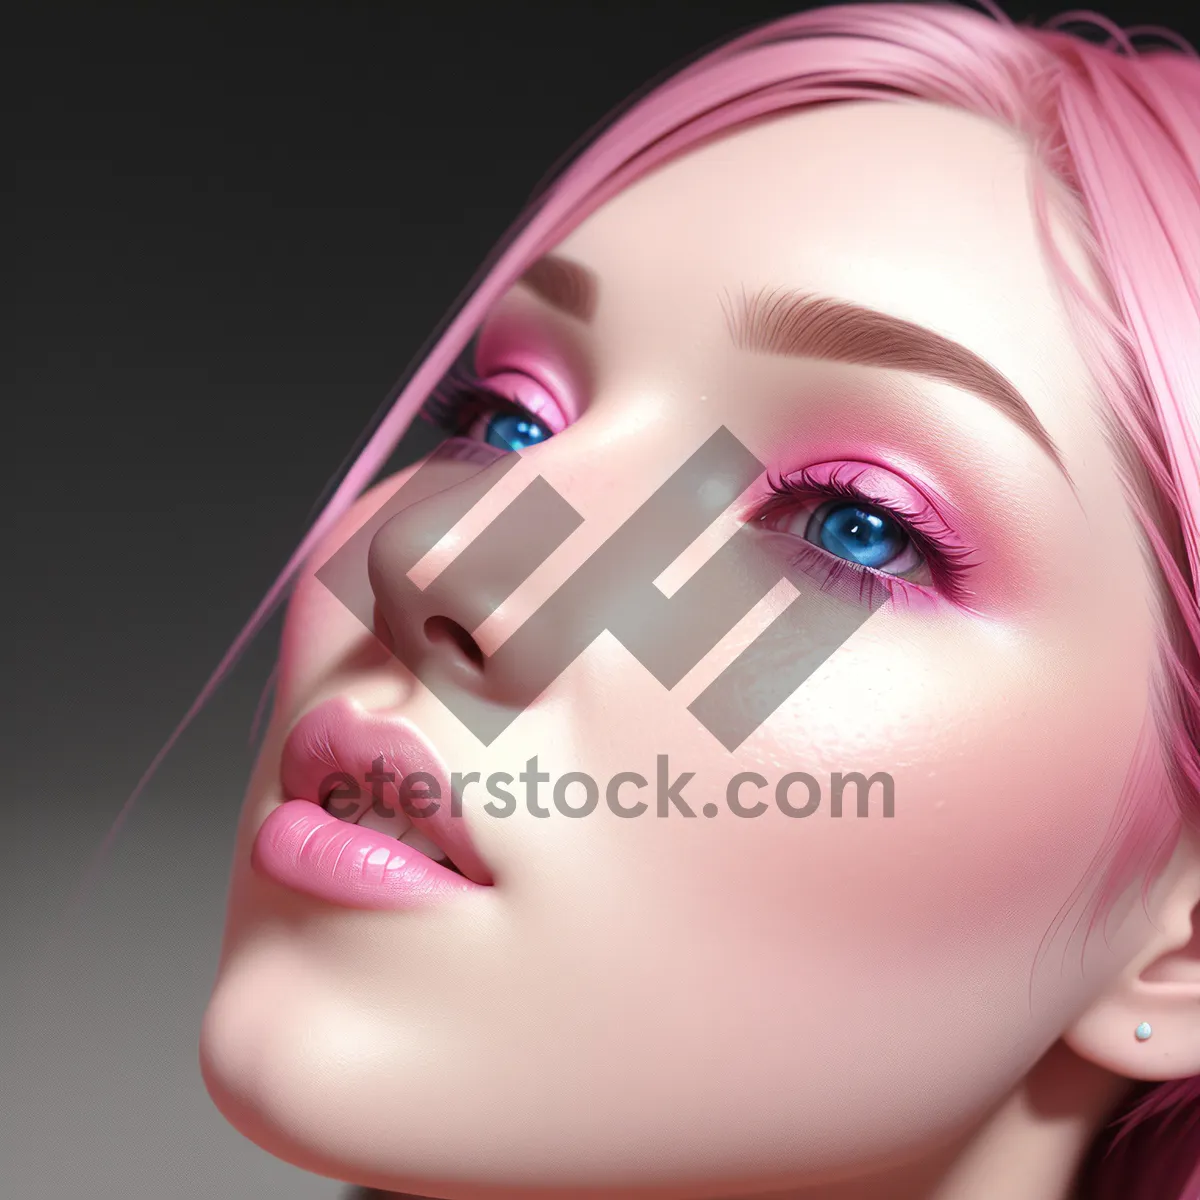 Picture of Radiant Beauty: Close-up Portrait of Attractive Model with Clean, Healthy Skin